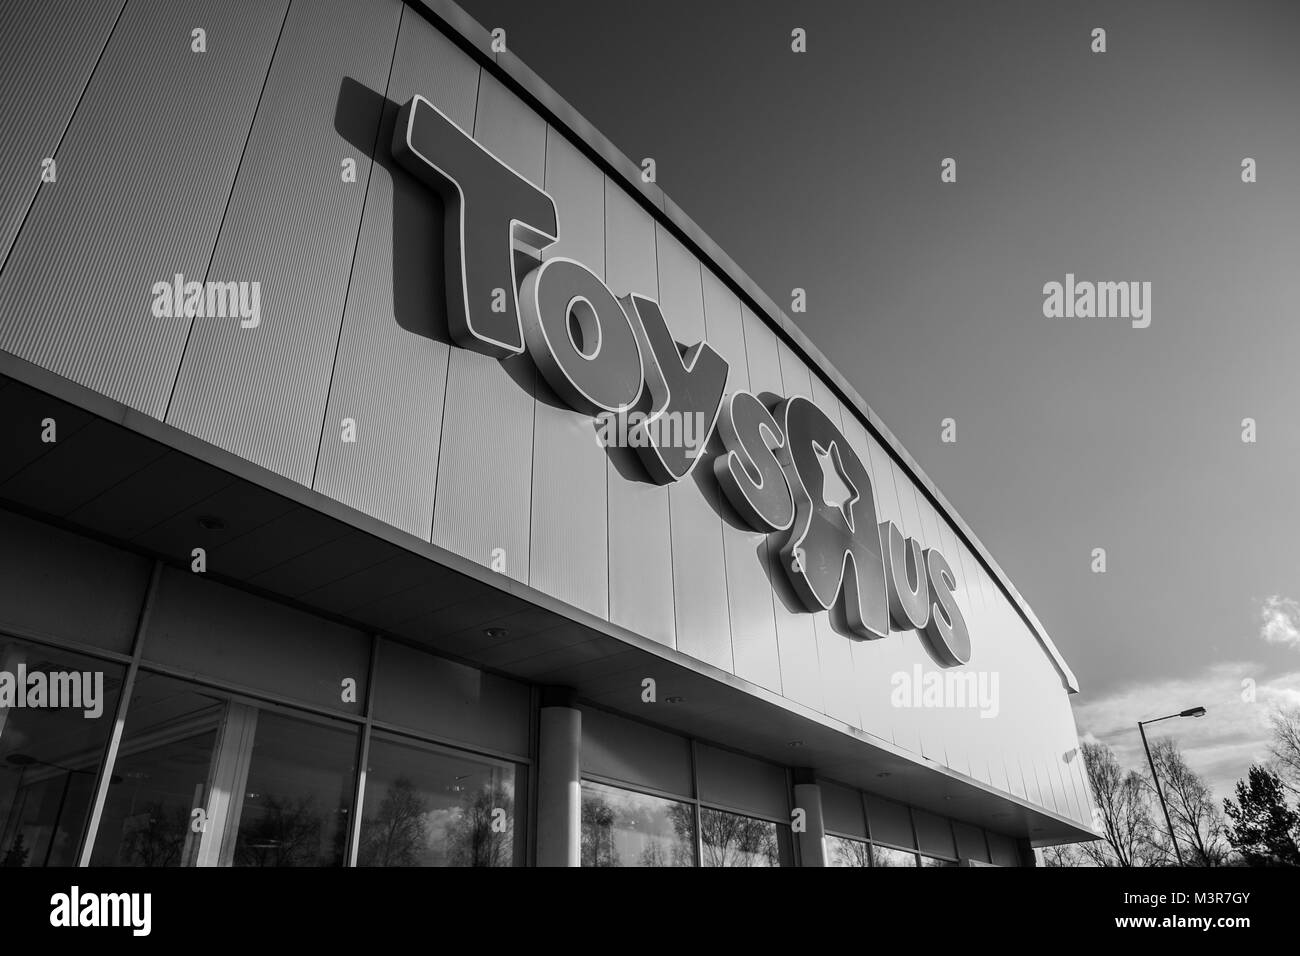 Toys R Us store front days after it announced it would be closing 16 of its UK stores. 12th February 2018, Warrington, UK. Black and White Image. Stock Photo